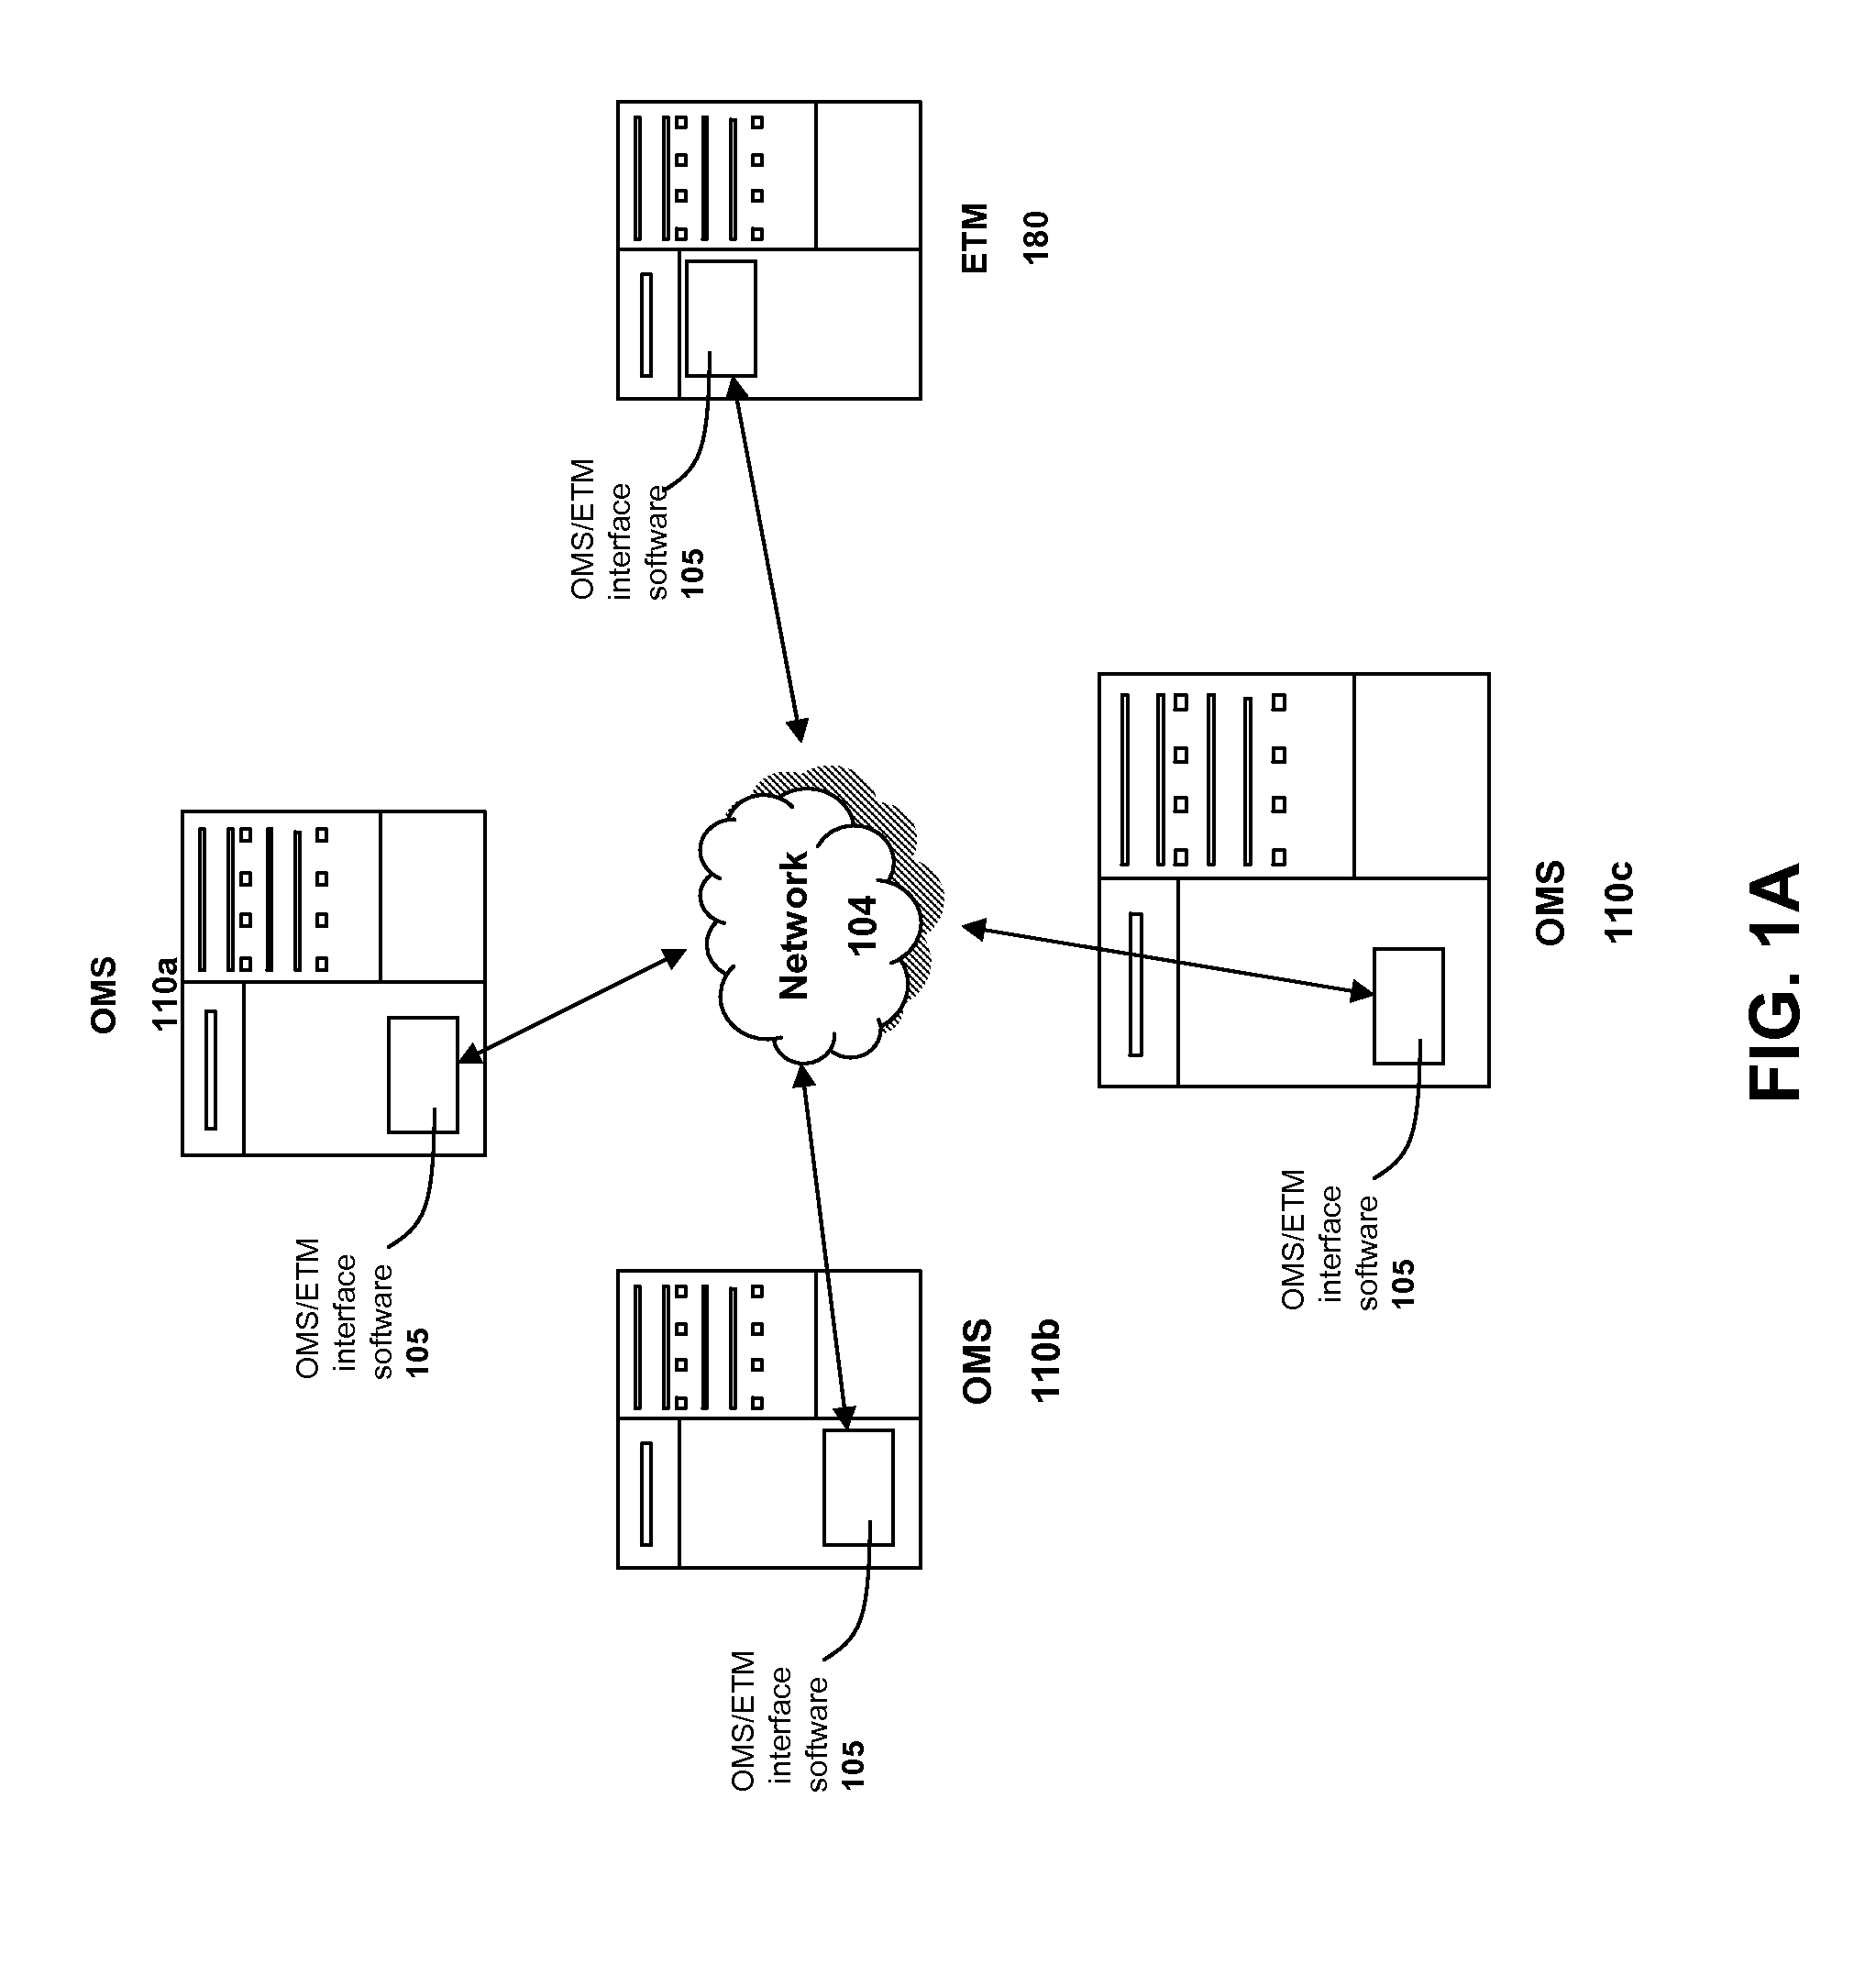 Systems and methods for facilitating electronic securities transactions